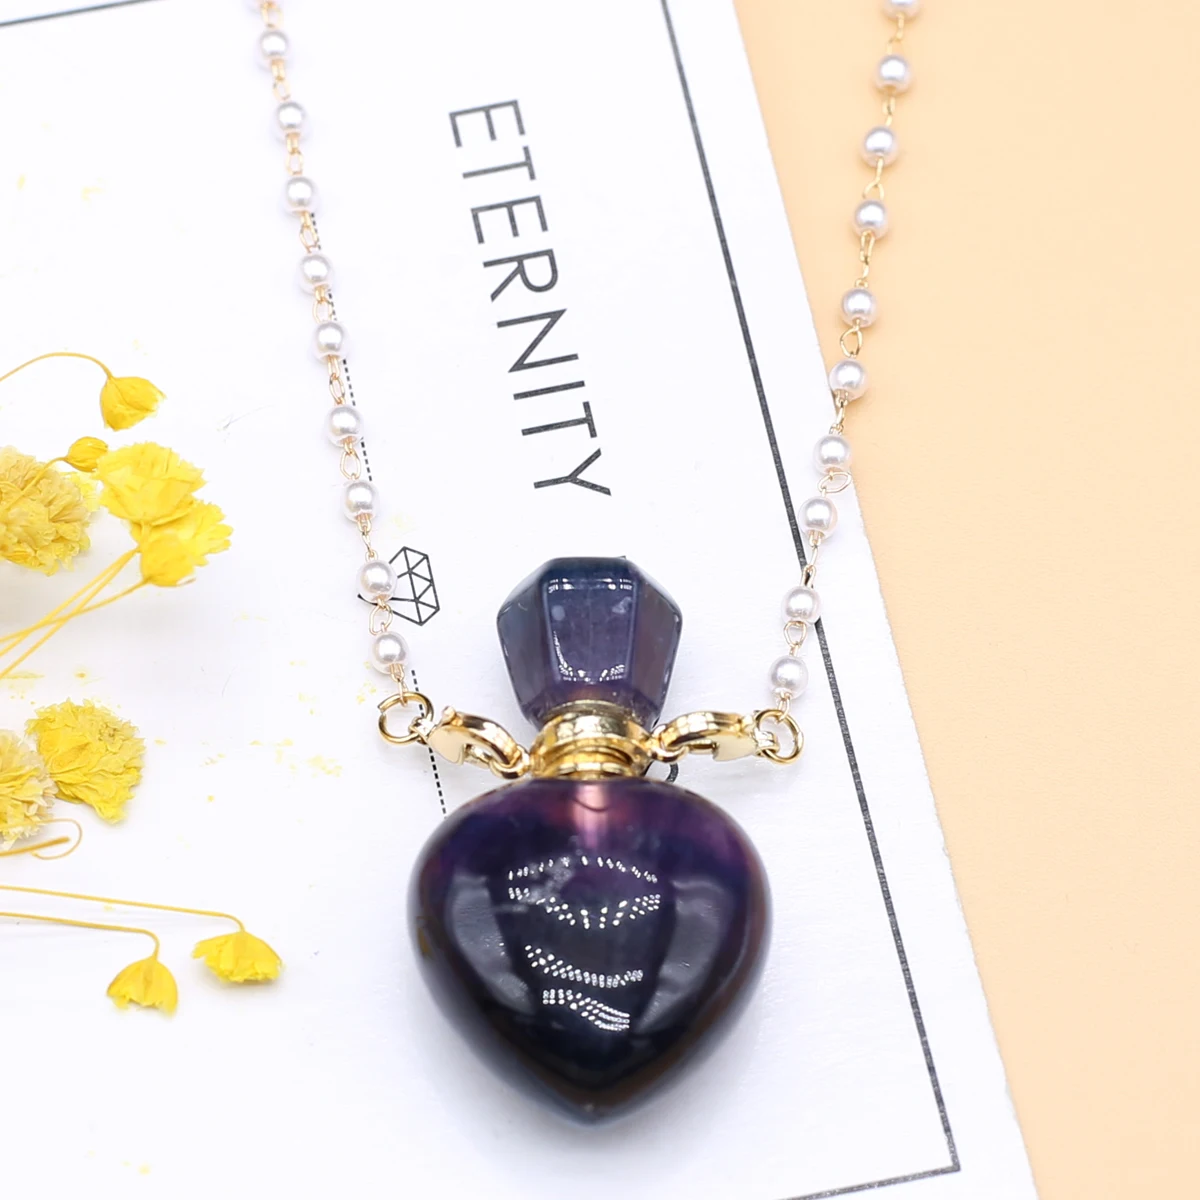 

Natural Fluorite Stone Perfume Bottle Pendants Necklace Pearl Chains Essential Oil Bottles for Women Jewerly